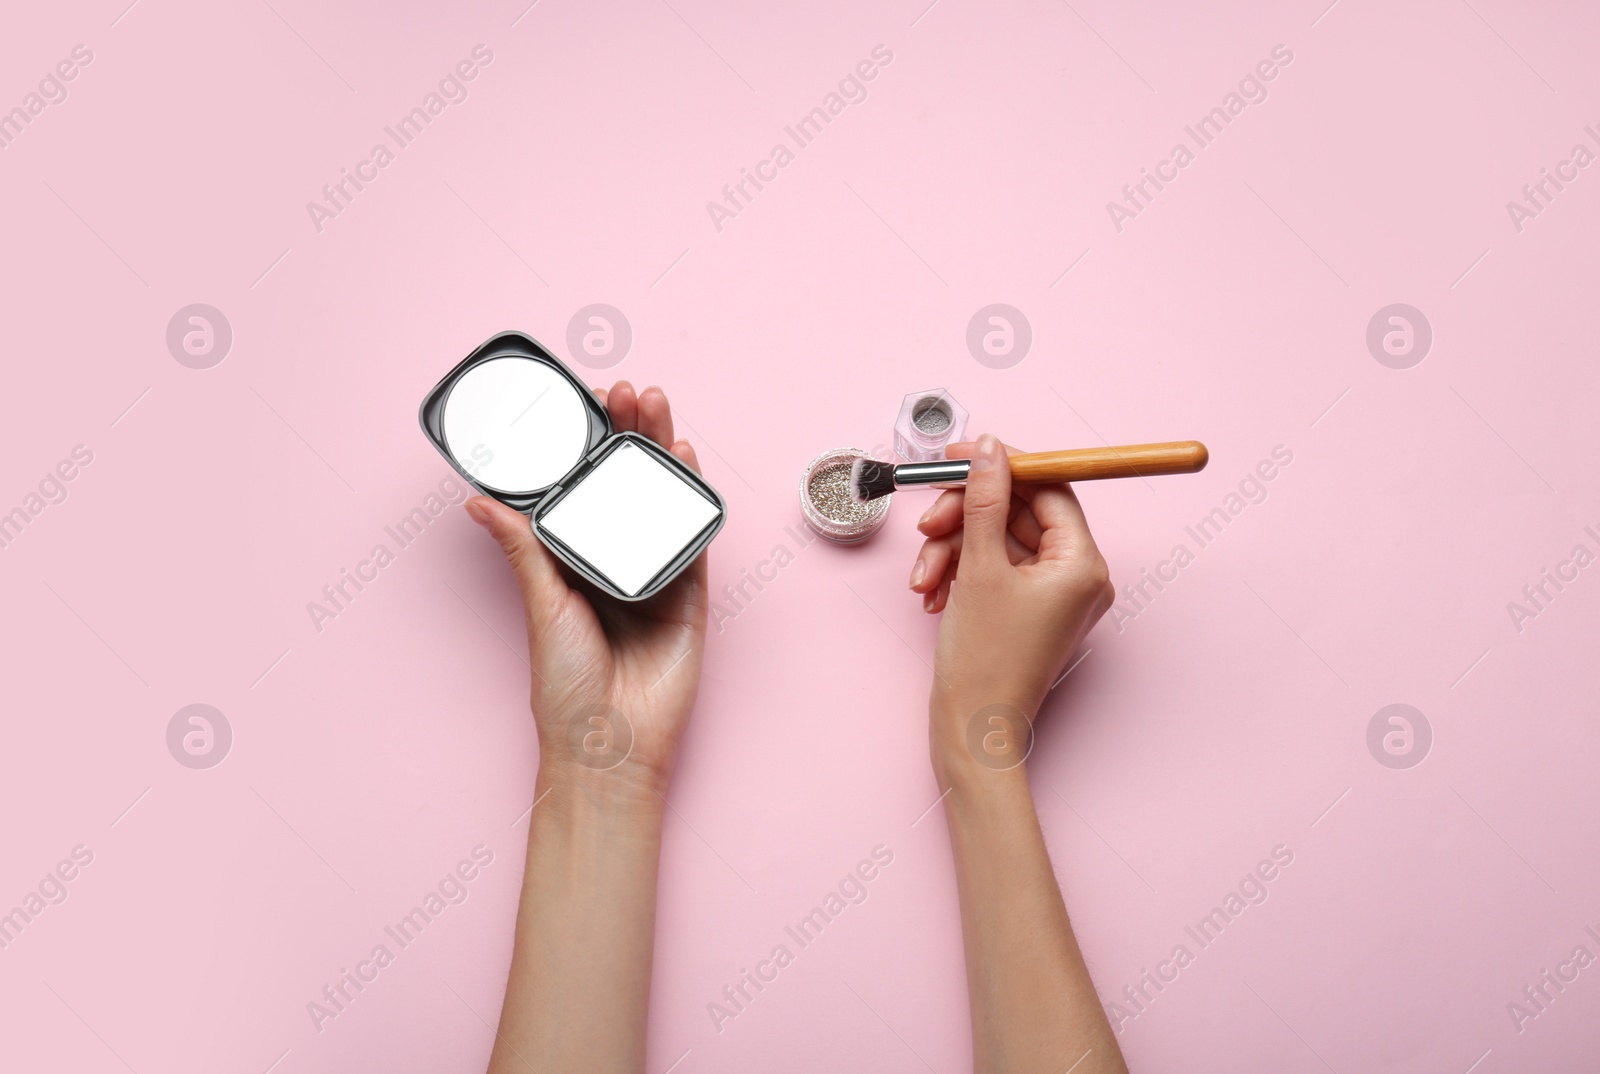 Photo of Woman holding pocket mirror and brush on pink background, top view